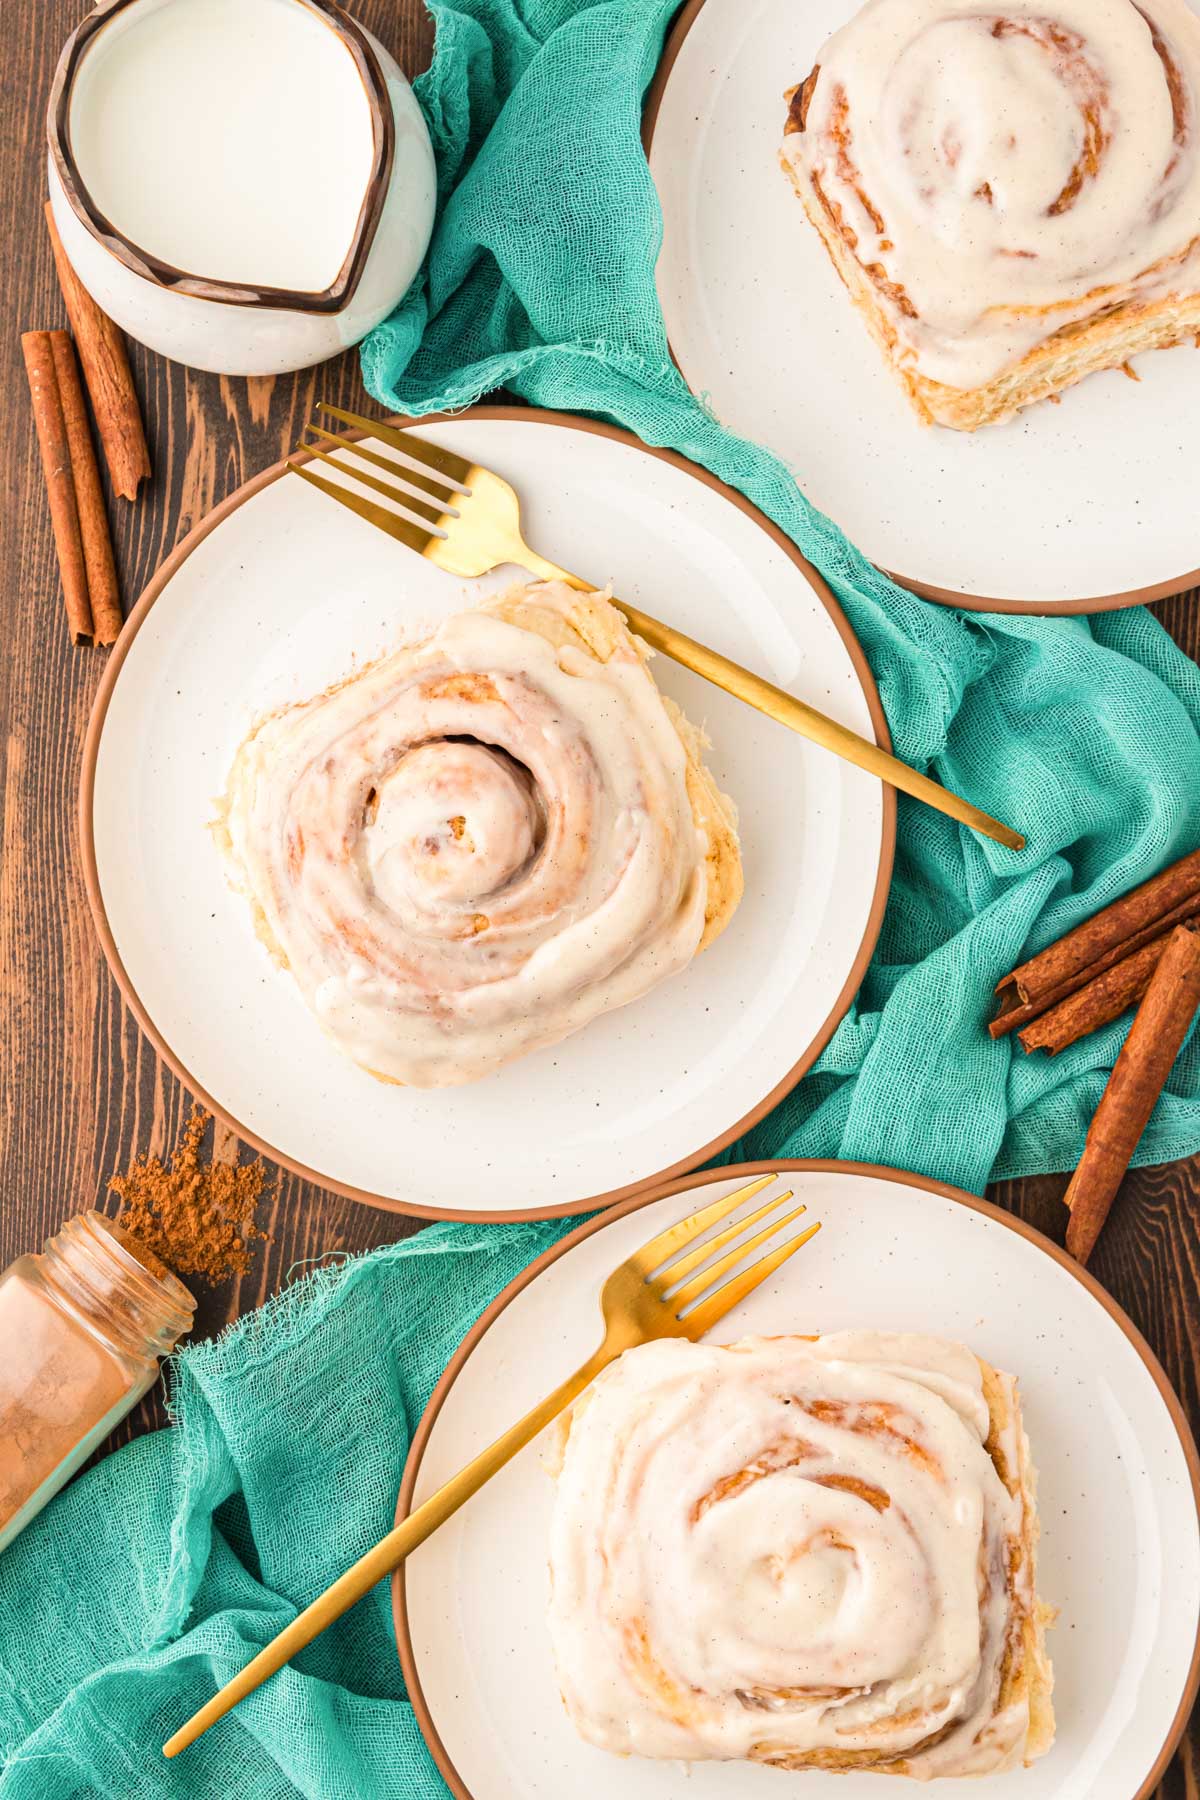 Overhead photo of cinnamon rolls on a plate on a wooden table with a teal napkin.